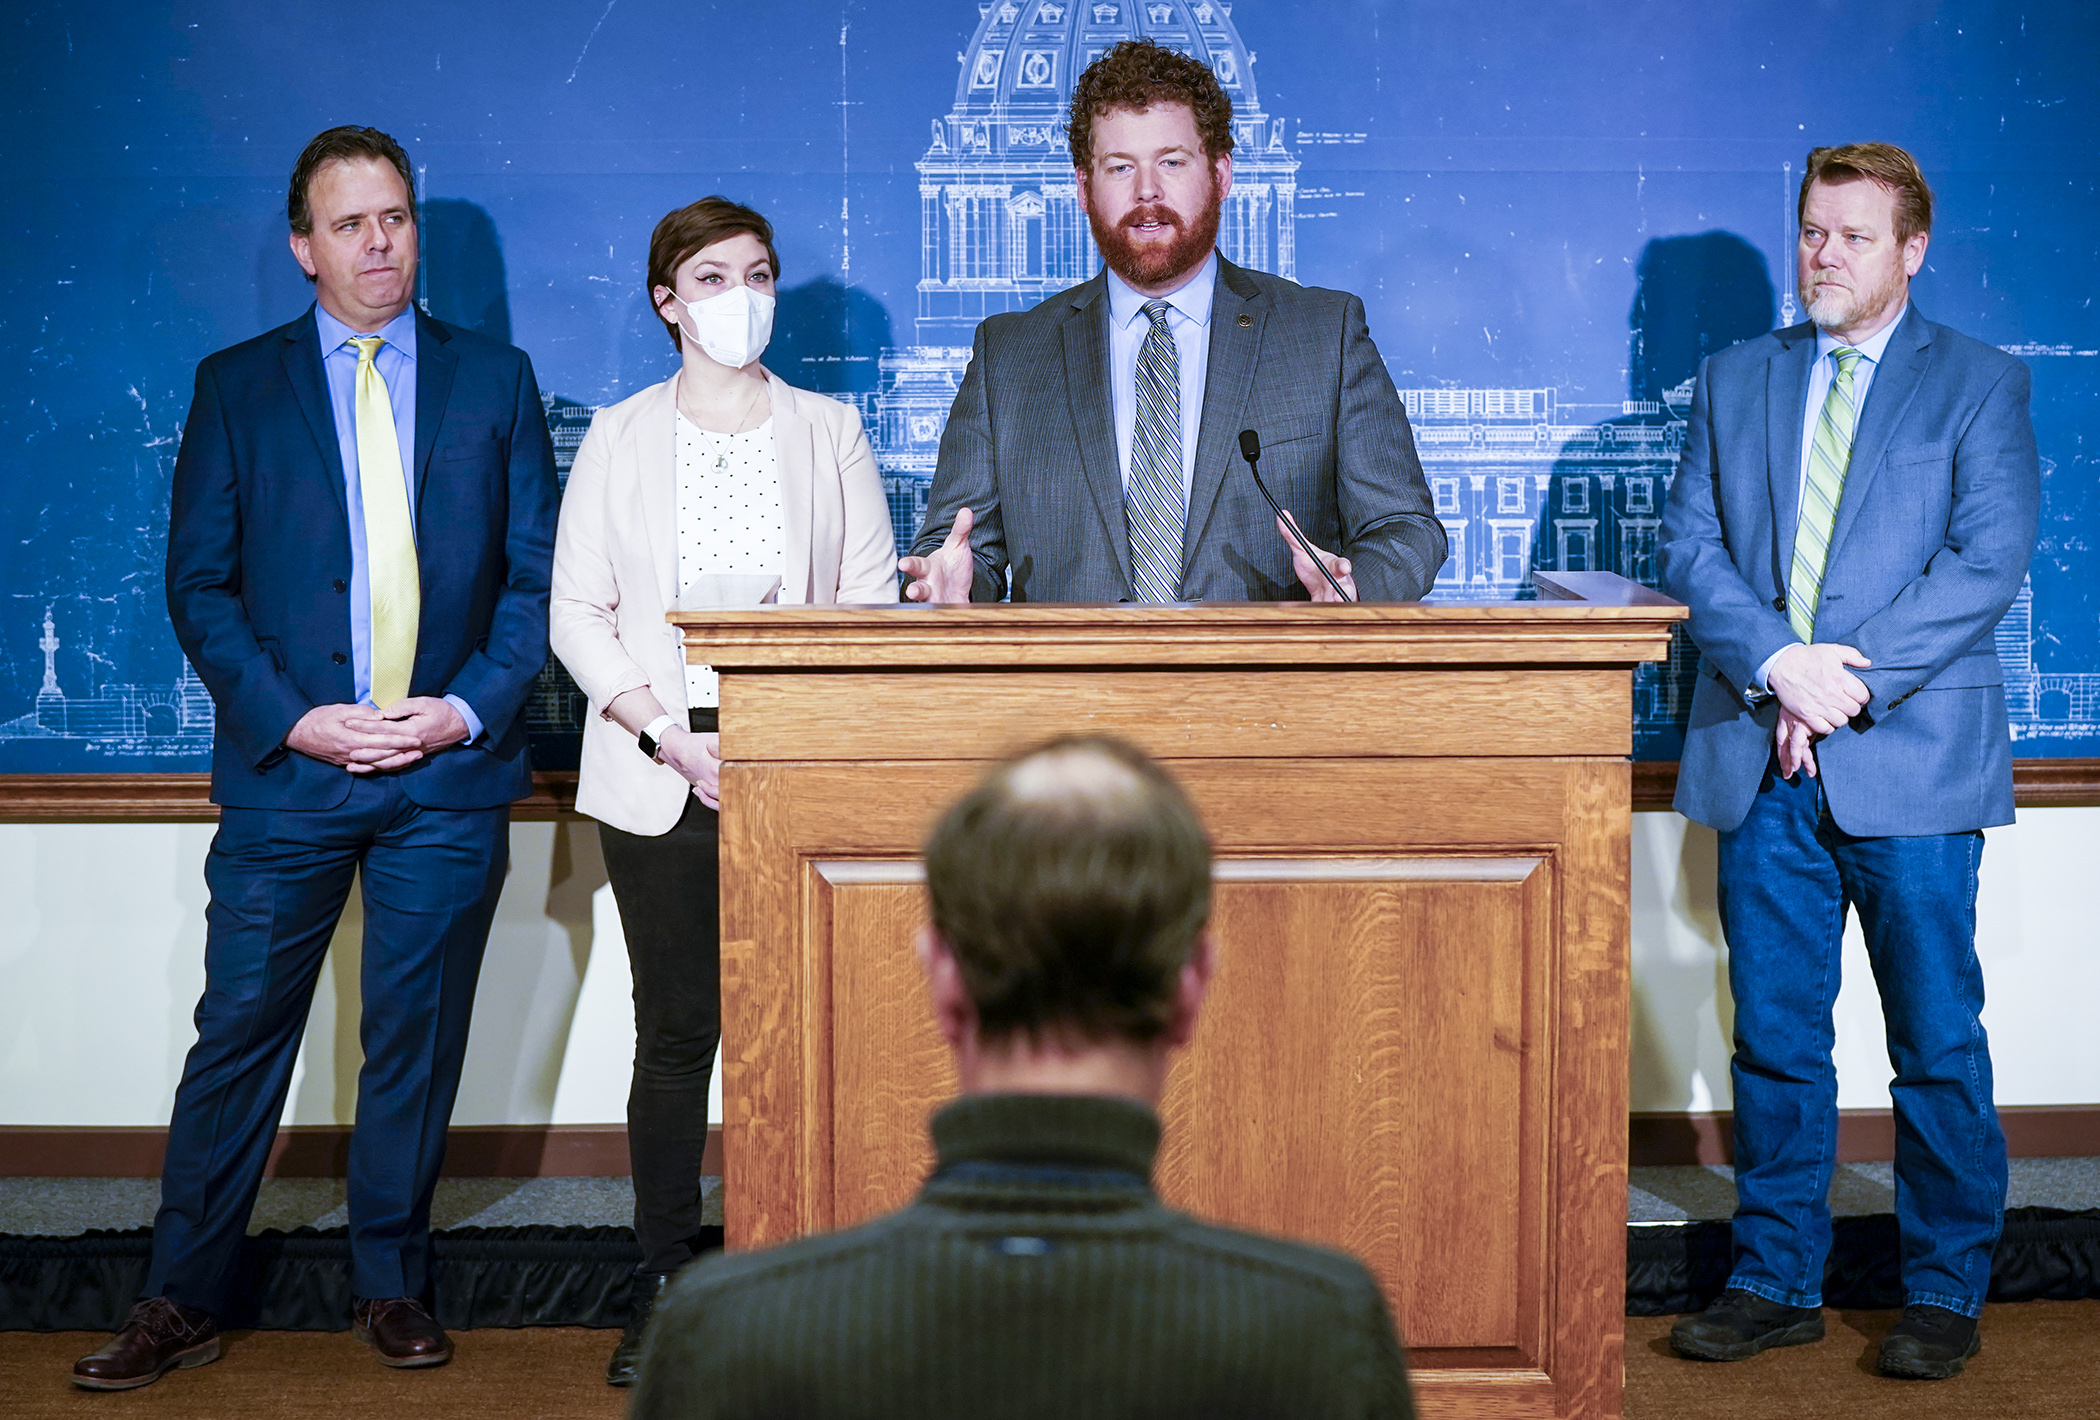 Rep. Zack Stephenson speaks during a March 7 press conference on his bill, HF778, which would legalize sports betting in Minnesota. Also attending are Rep. Pat Garofalo, from left, Rep. Carlie Kotyza-Witthuhn and Rep. Tony Jurgens. (Photo by Paul Battaglia)